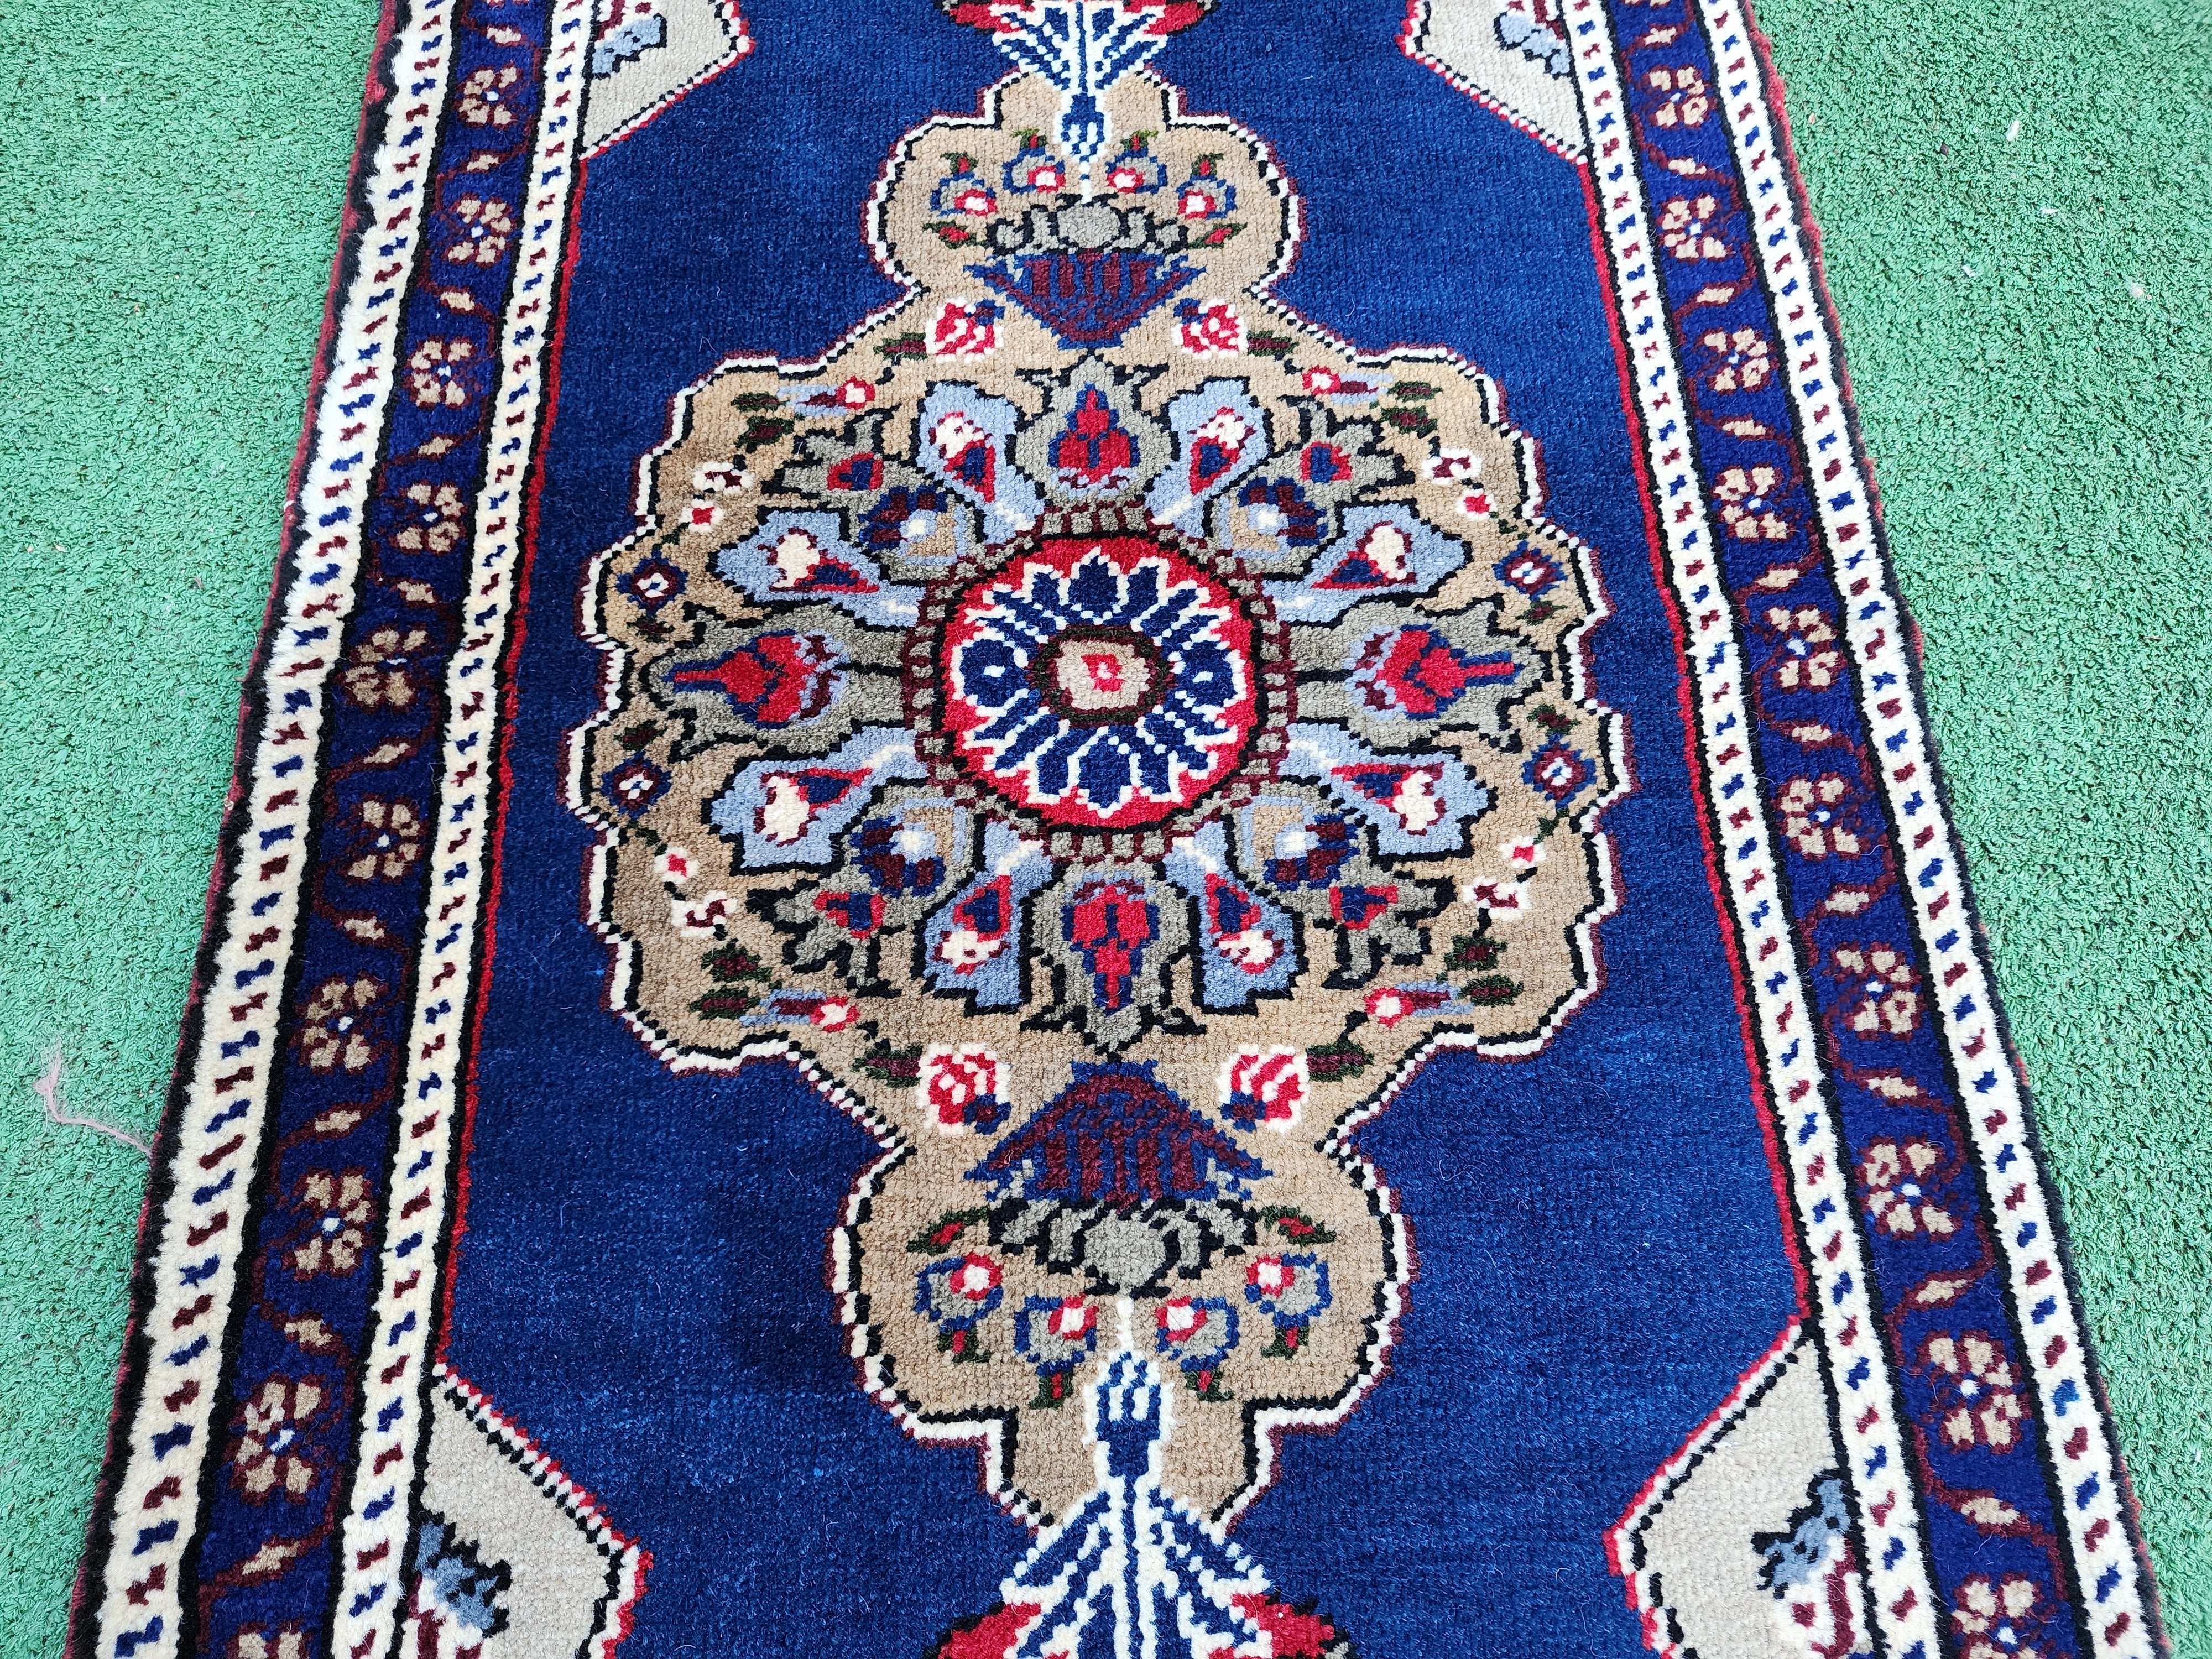 Vintage Turkish Small Rug, 3 ft 5 in x 1 ft 7 in, ft Red, Blue and Beige Faded Distressed Antique Style Mat